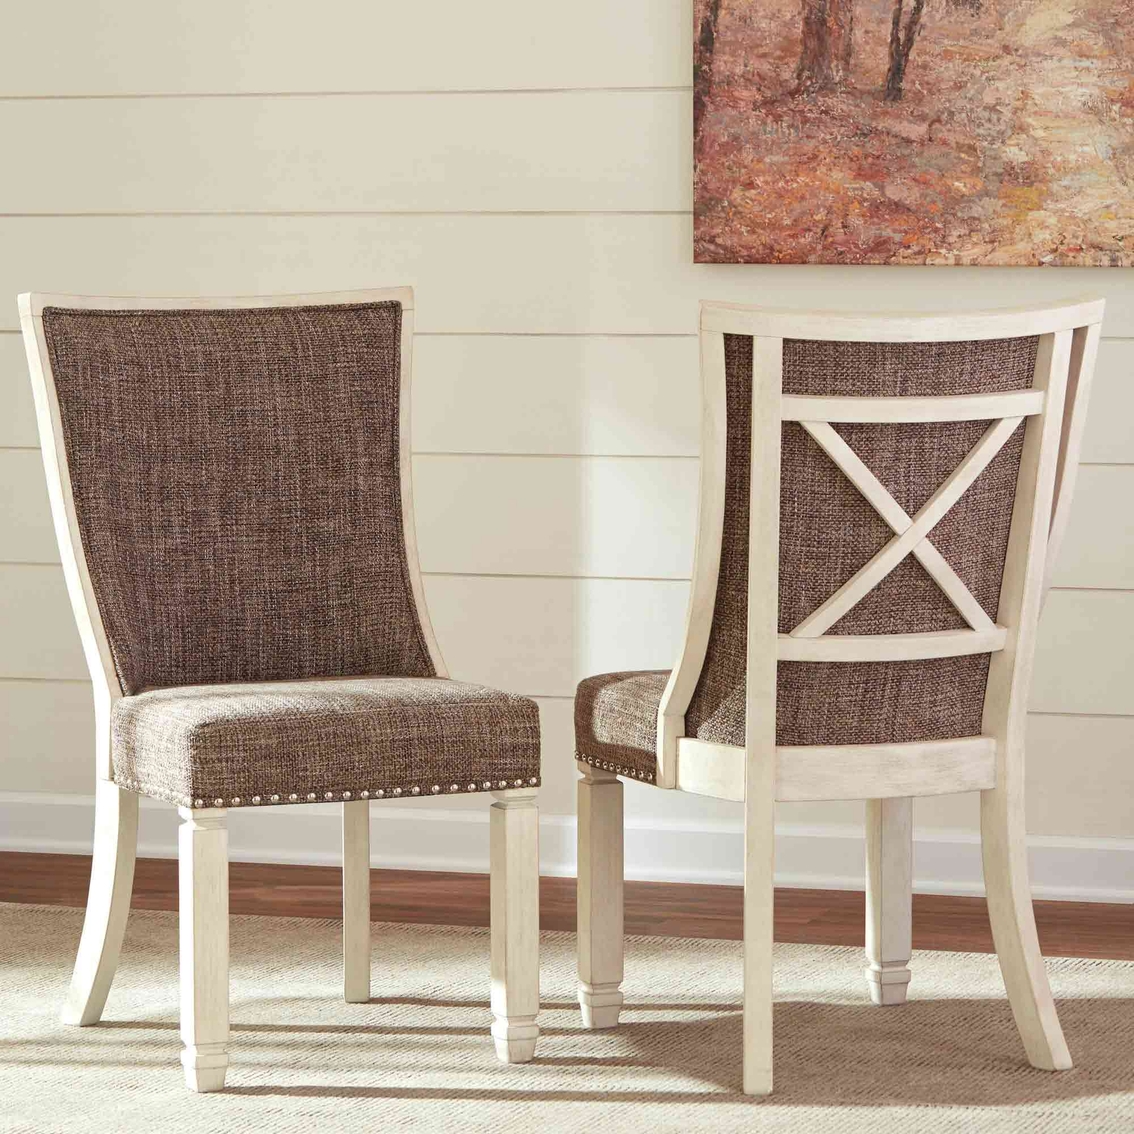 Signature Design by Ashley Bolanburg Upholstered Dining Chair, Brown 2 Pk. - Image 2 of 4